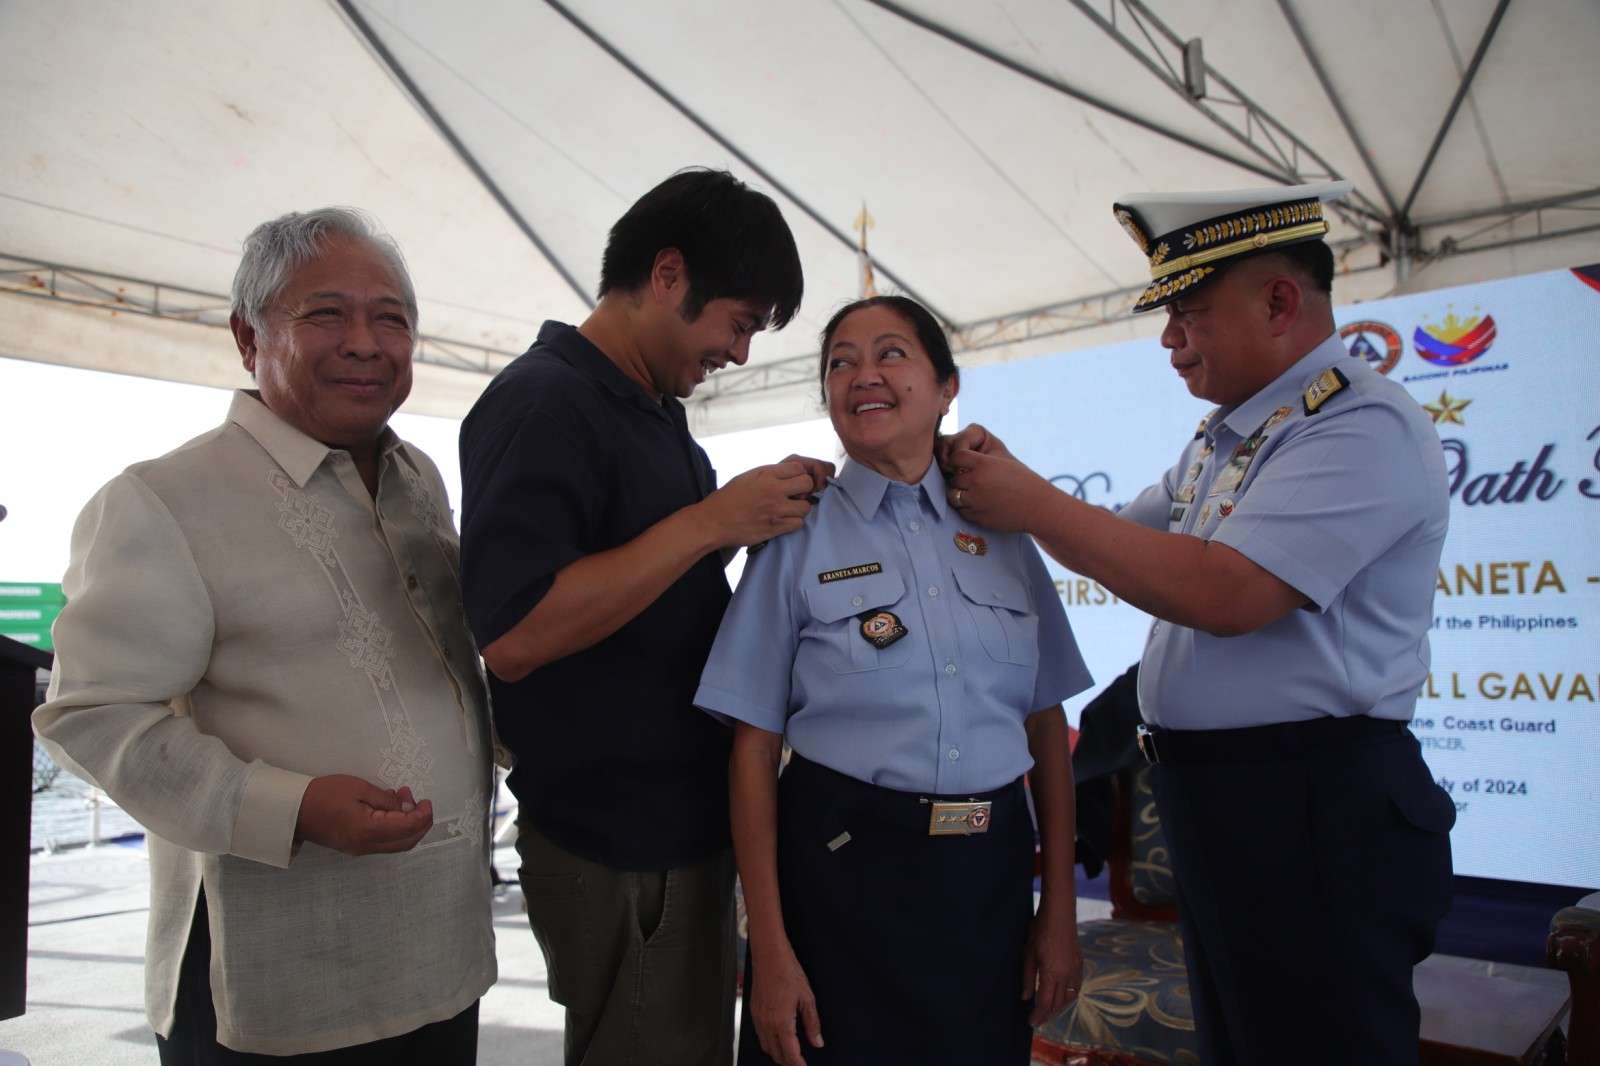 LOOK: First Lady Liza Marcos joins PCG Auxiliary